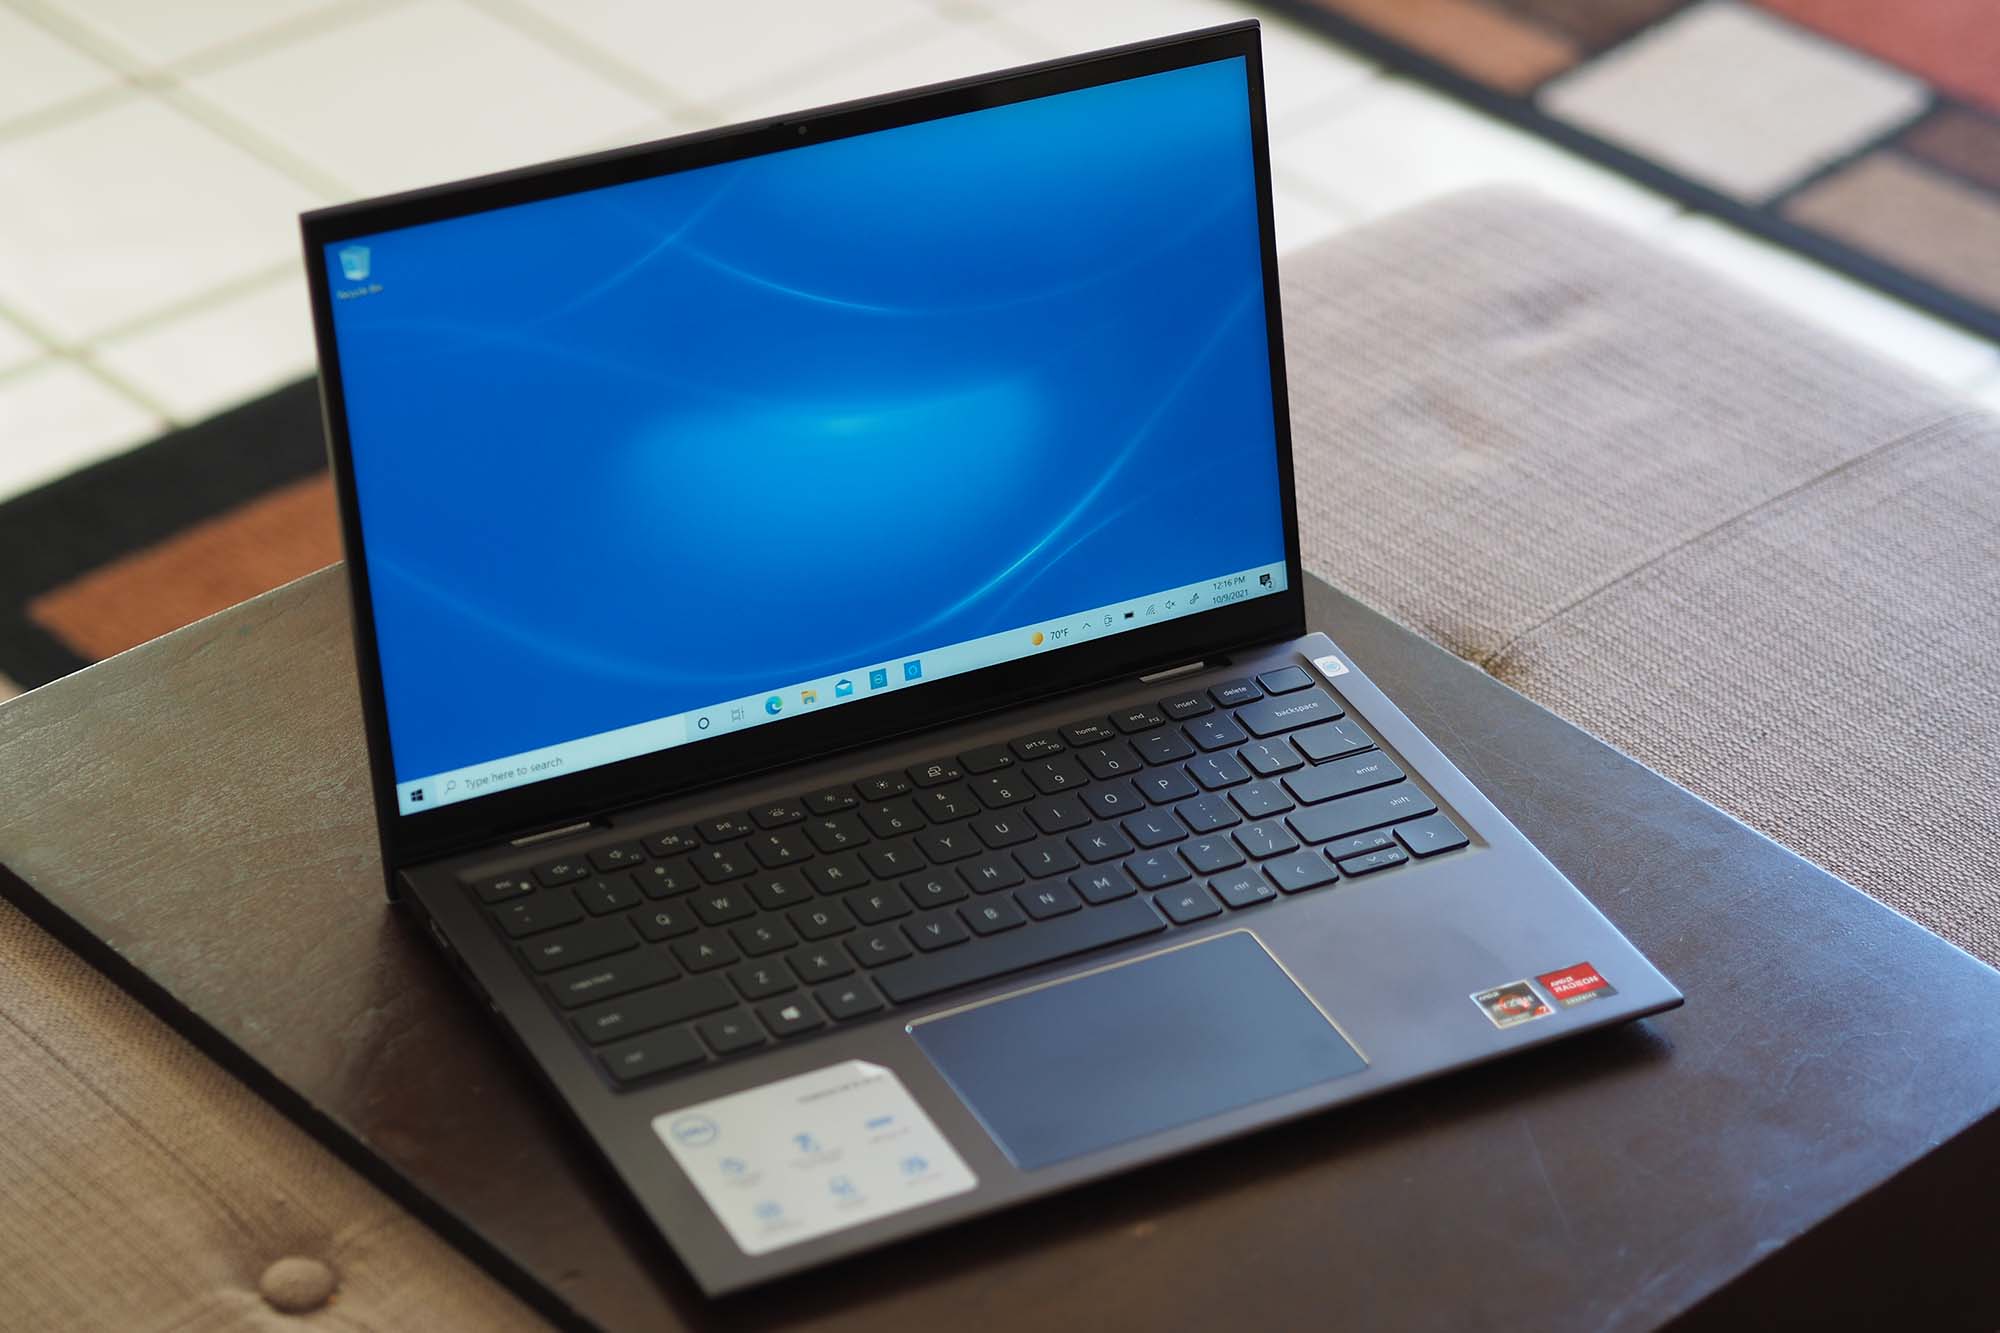 Dell Inspiron 14 2-in-1 Review: Sad Display, Good Laptop